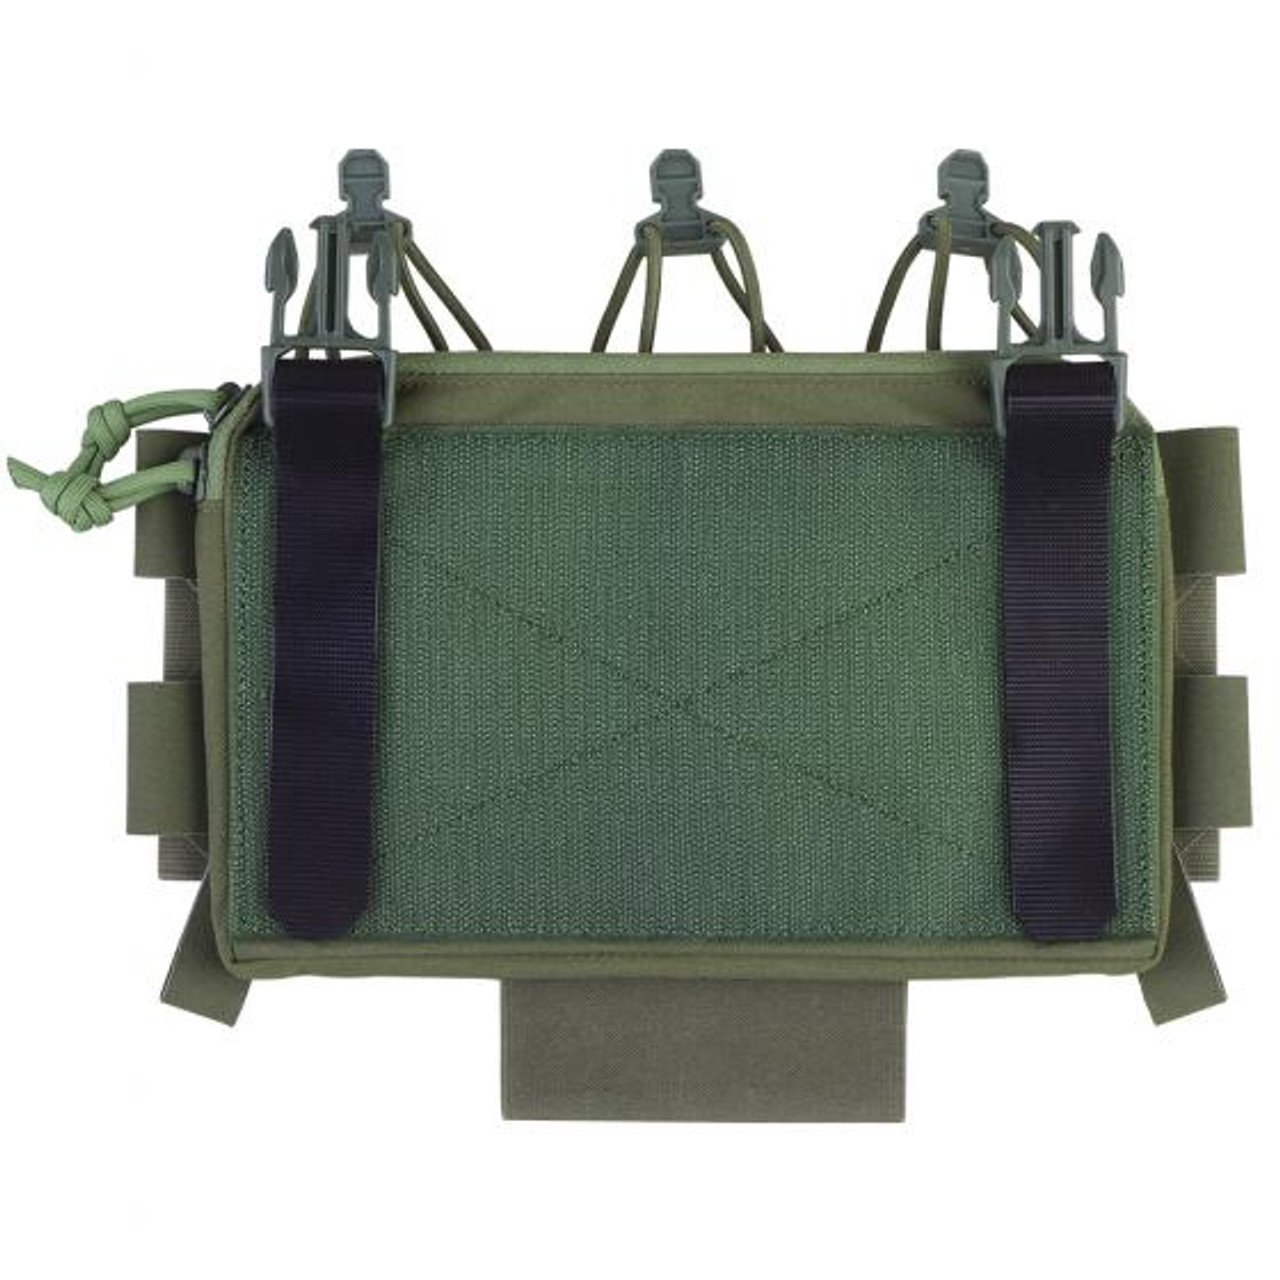 Nuprol PMC M4 Triple Open Mag Pouch V2 - Green